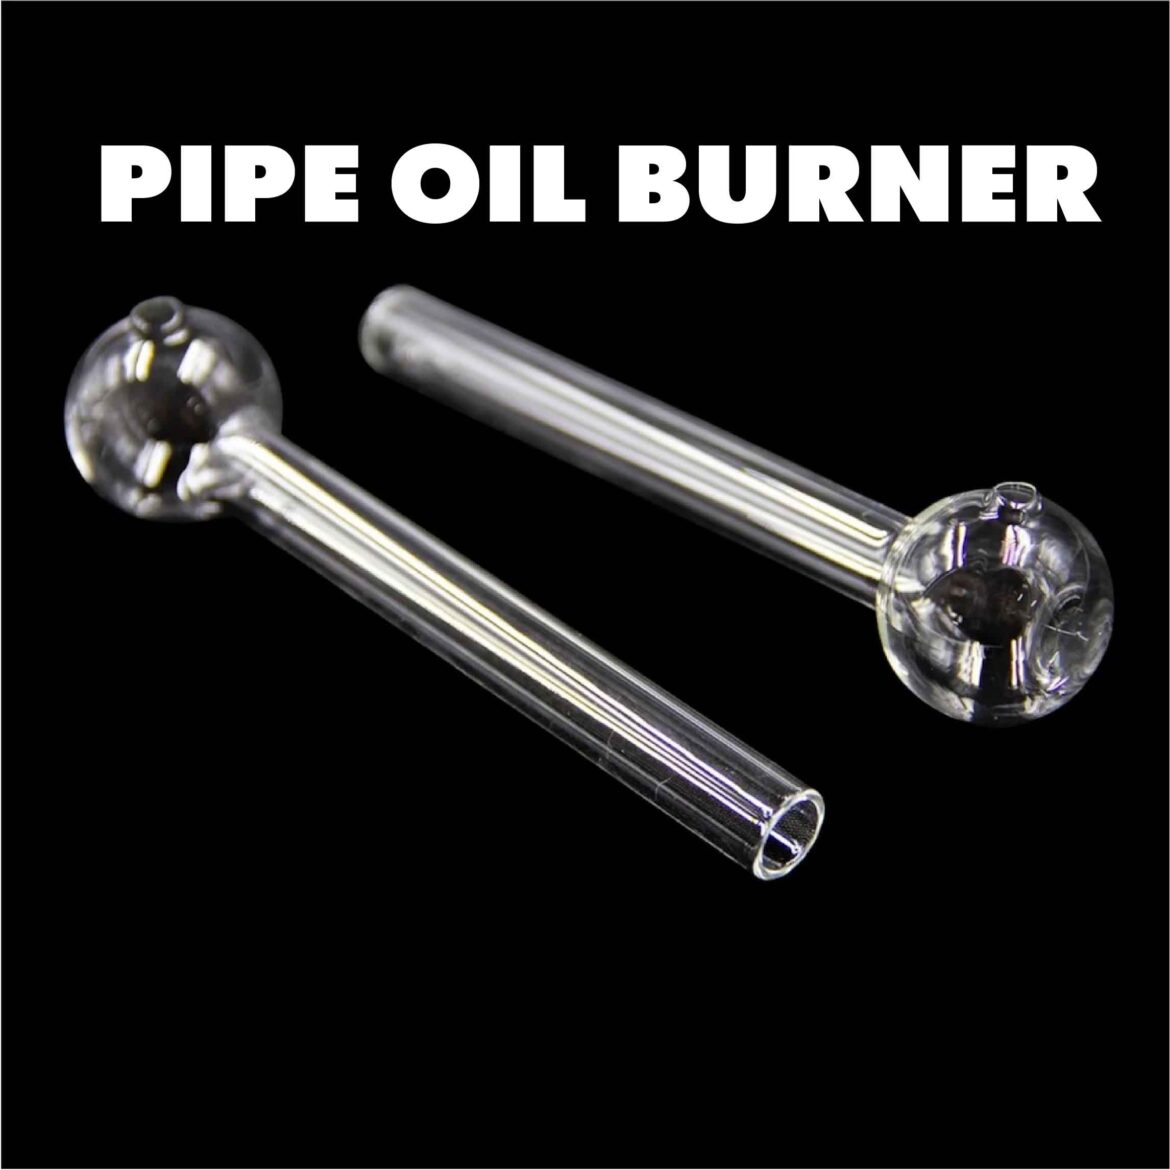 Efficient Pipe Oil Burner Heating Innovation for Cozy Spaces